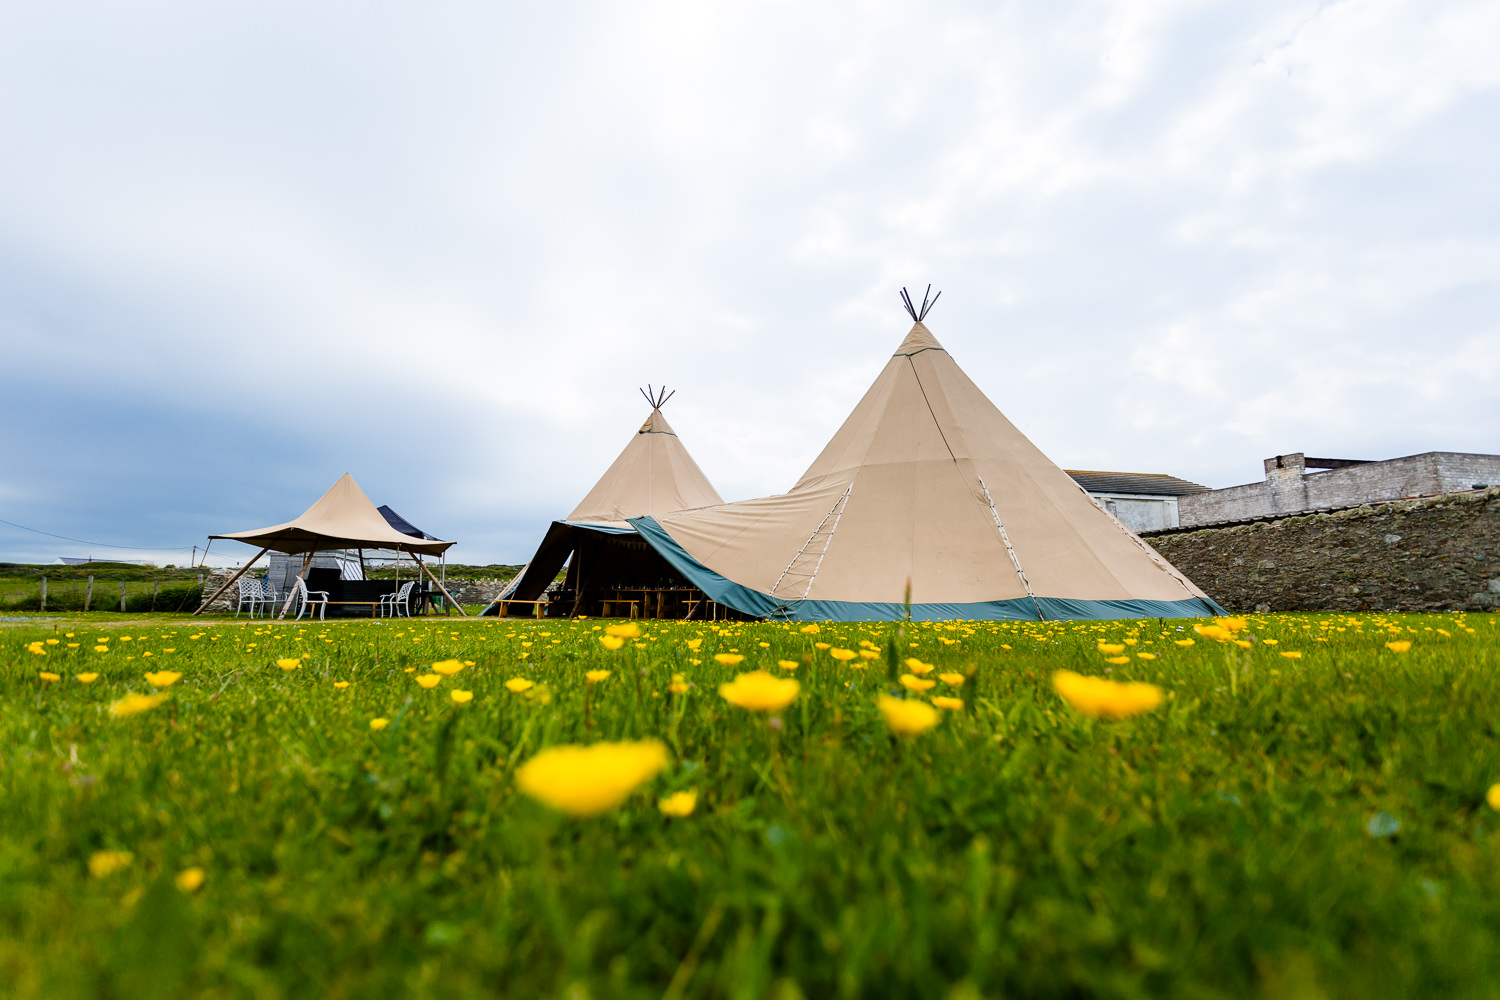 Wedding Tipi in a field for a relaxed festival wedding in Anglesey, Wales wedding photographer